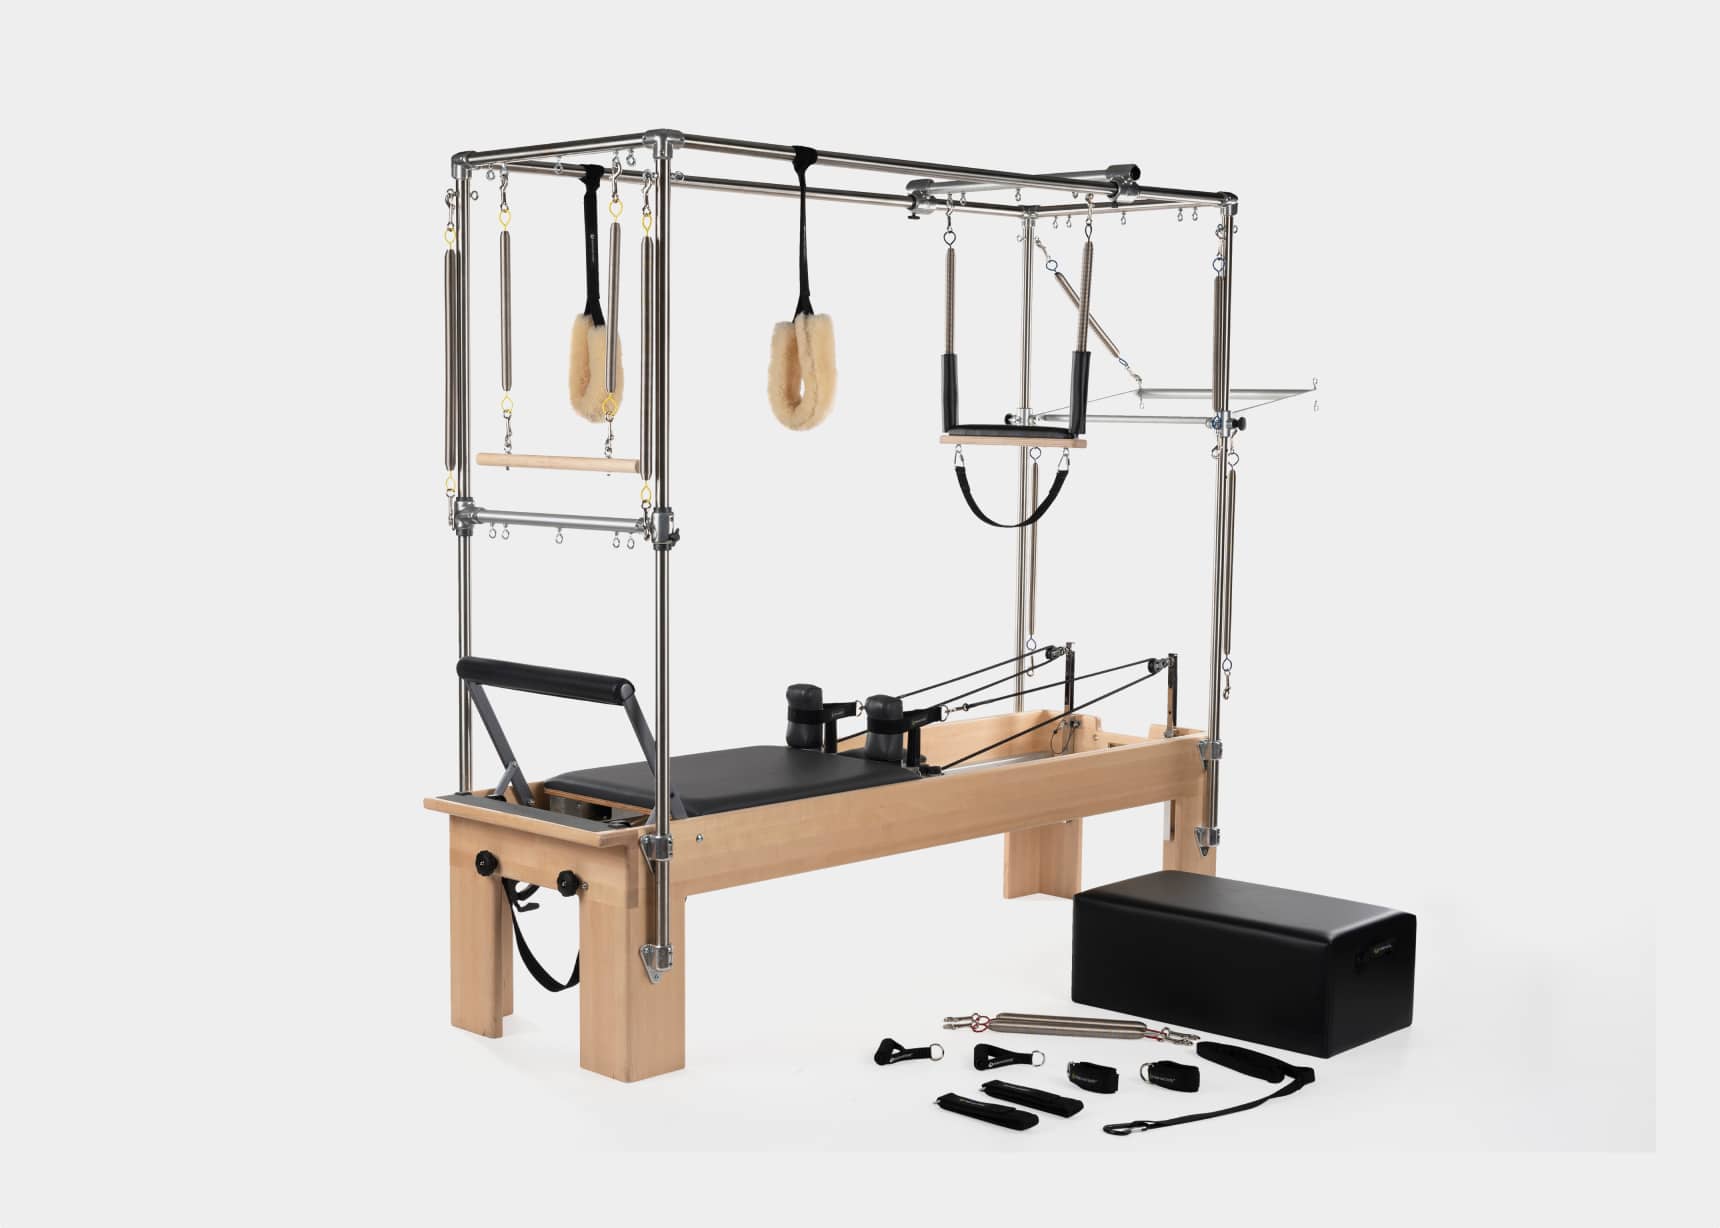 A multi-functional Pilates apparatus designed for versatile workouts, combining a reformer and trapeze.